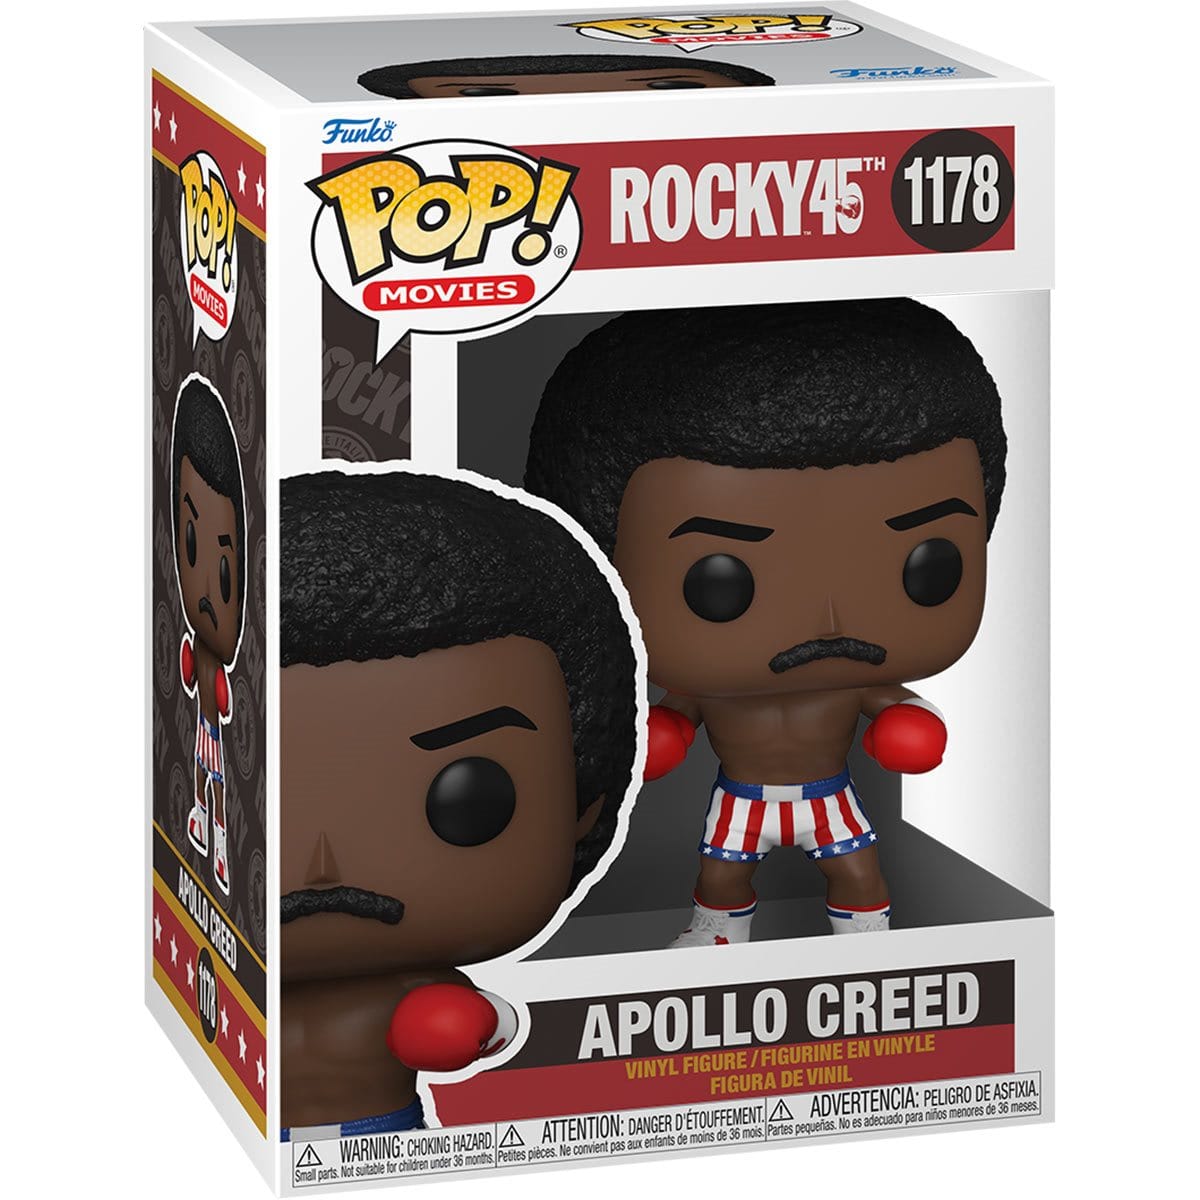 Rocky 45th Anniversary Apollo Creed Pop! Vinyl Figure Collectible Toy Action Figures